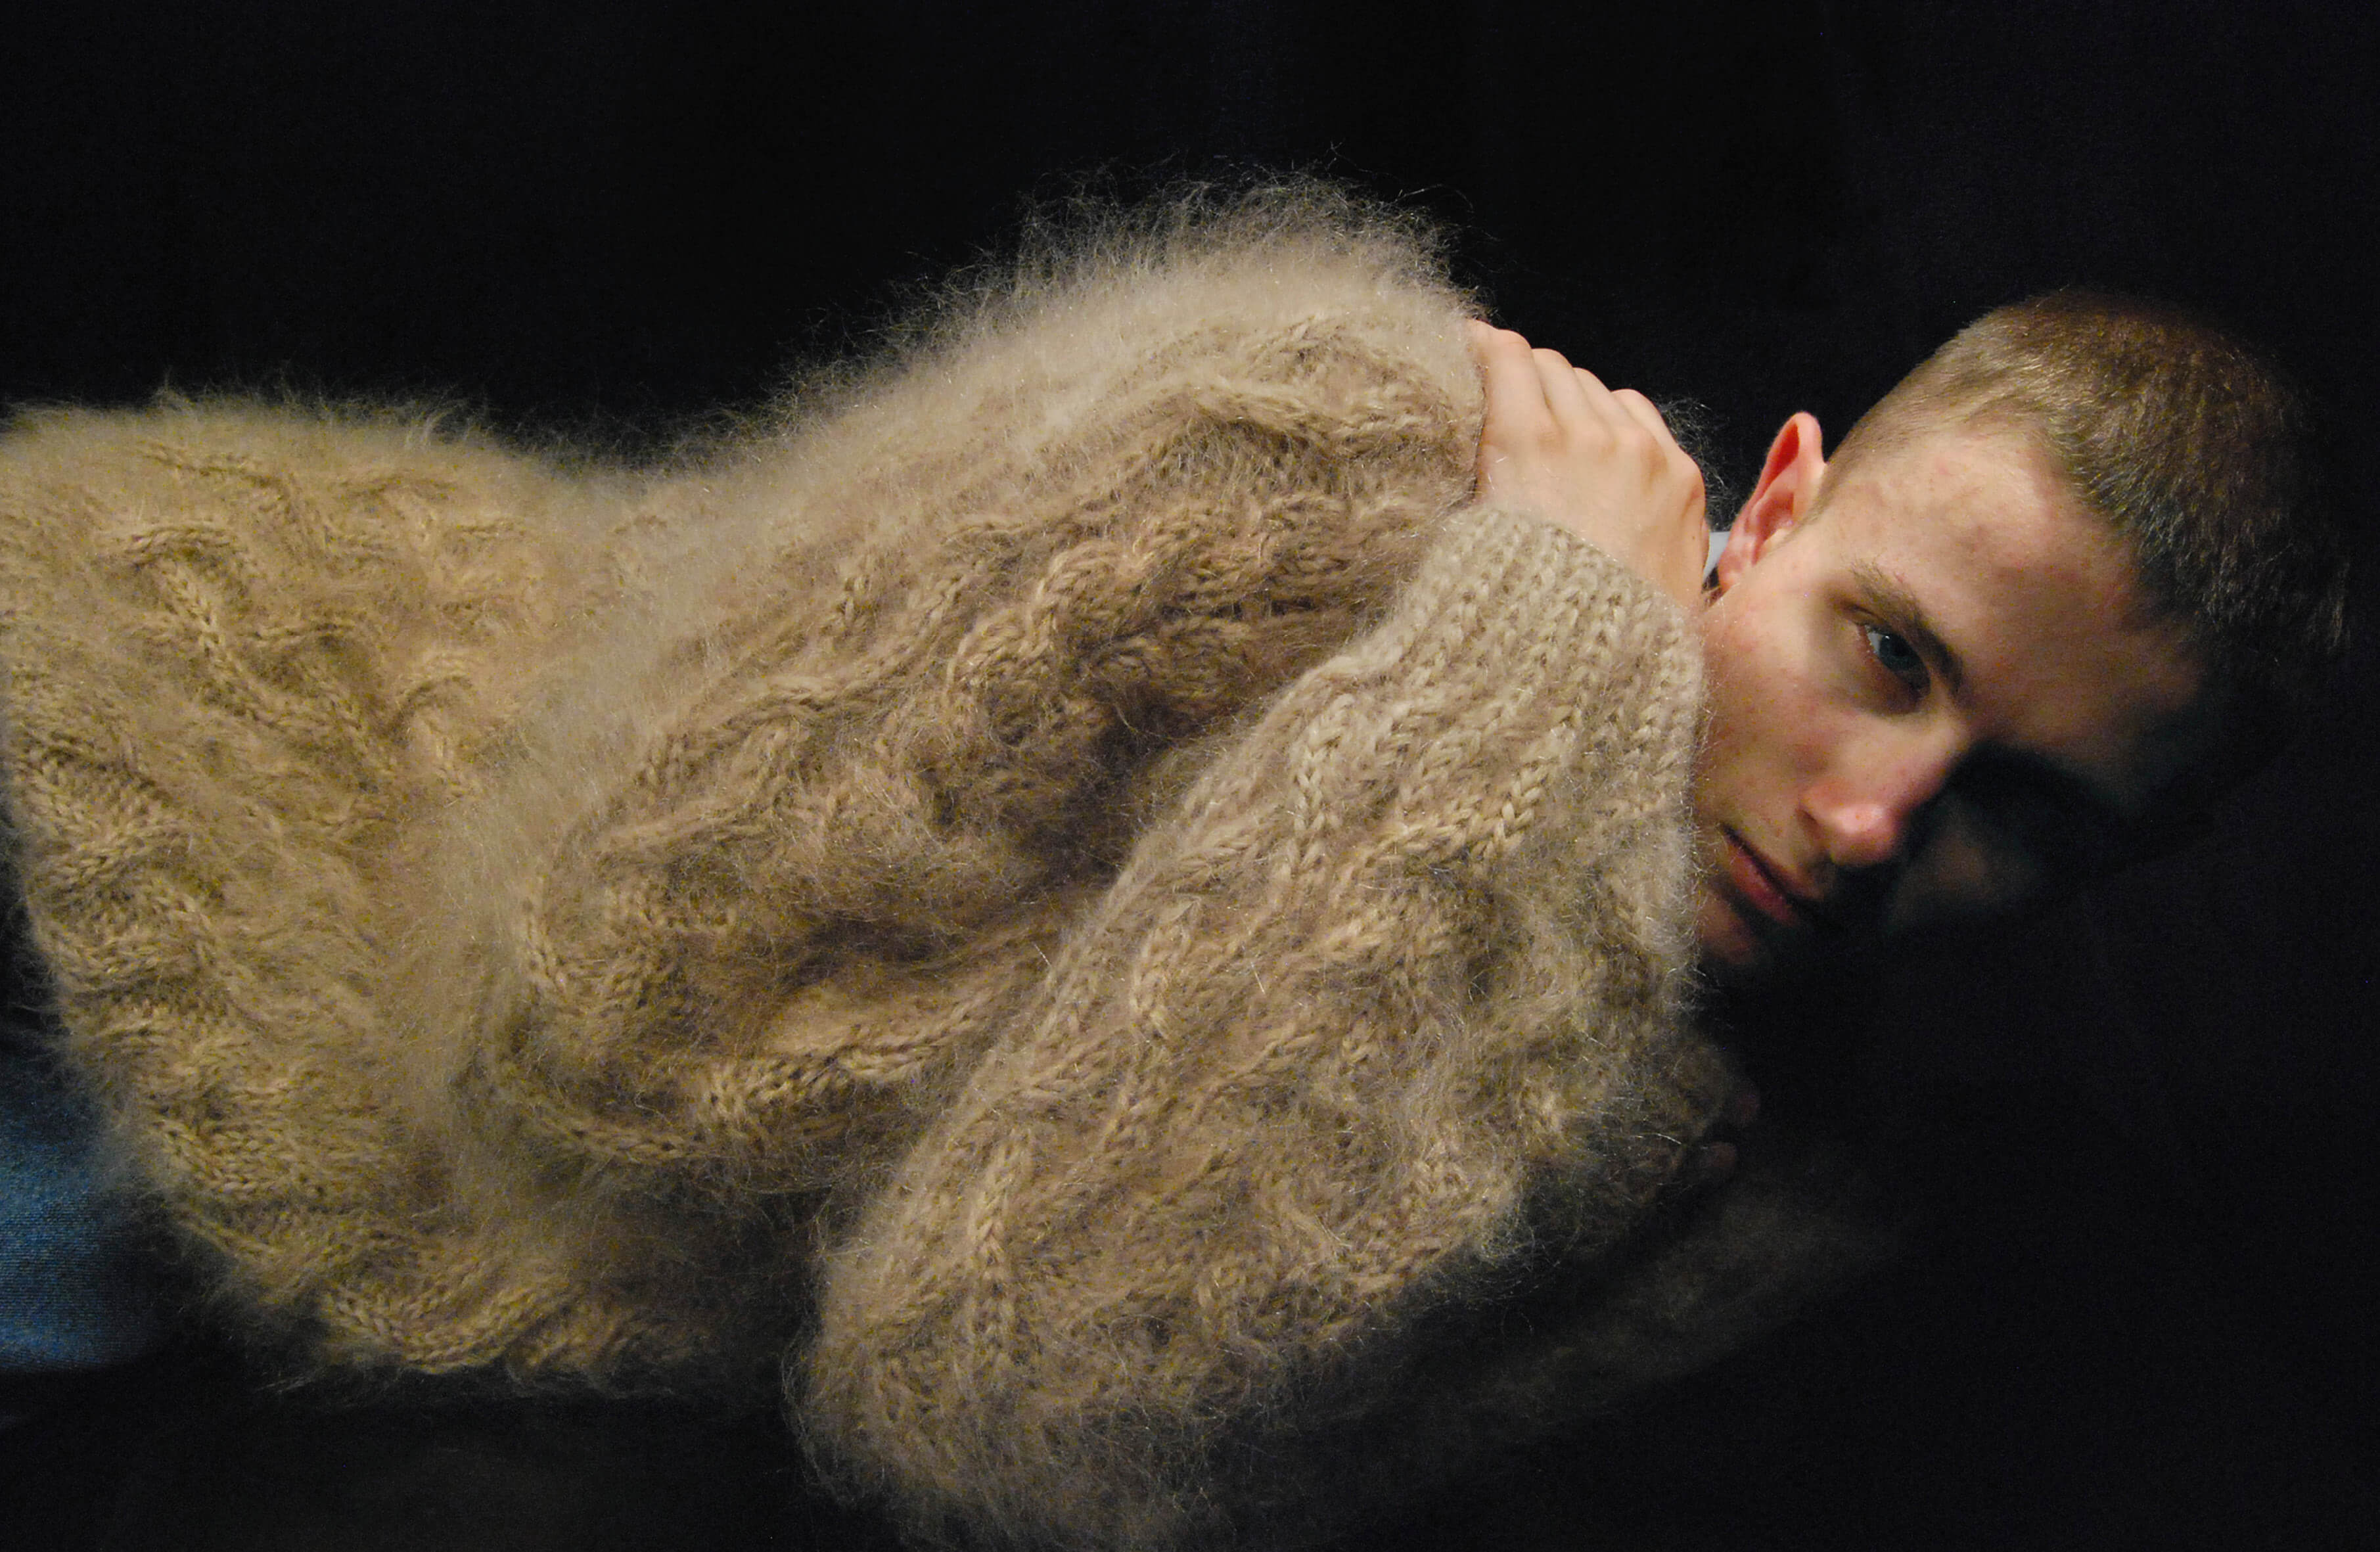 MASSES Magazine No. 11 – Le Mohair, Photography and Fashion by Scott G. Fraser from Scott's Sweaters scottssweaters.com – 2018